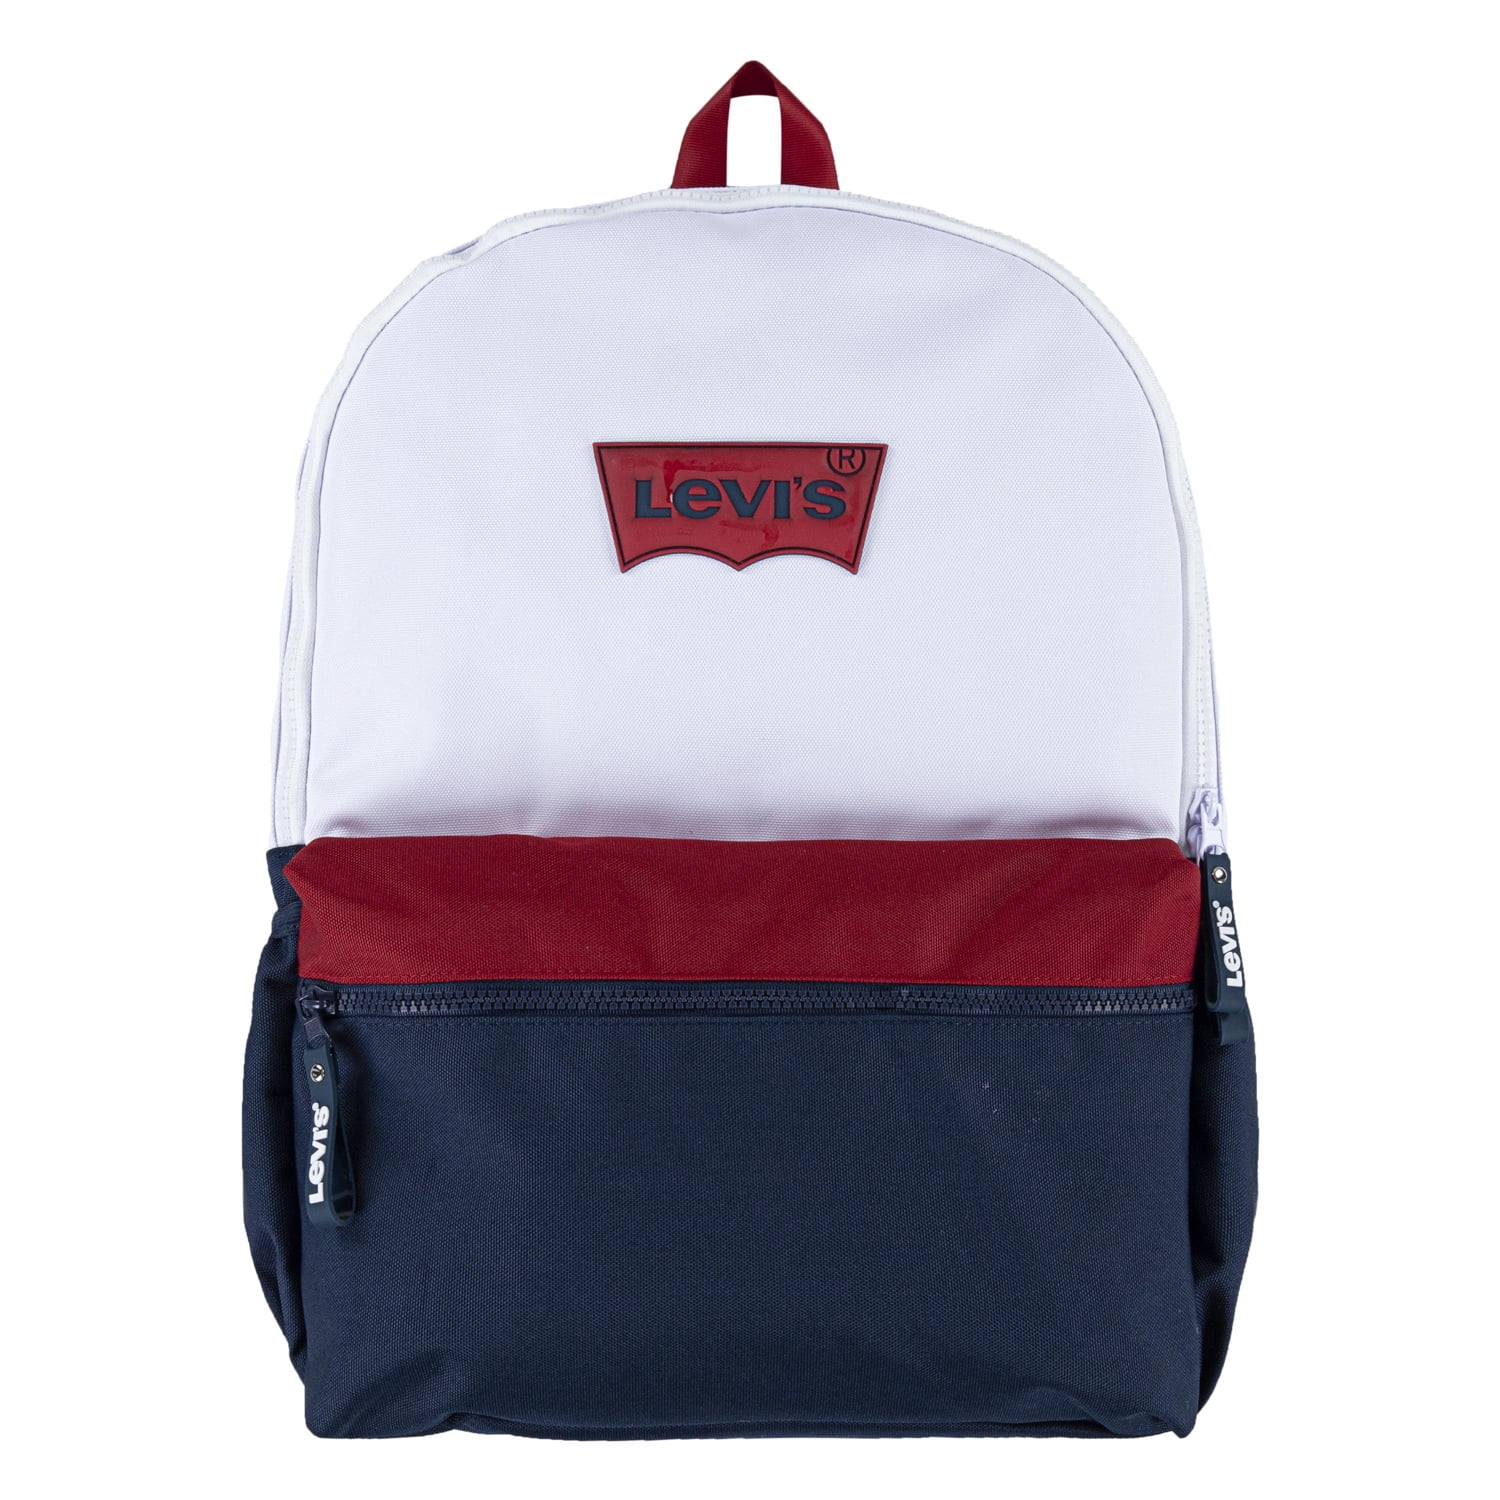 Levi's Unisex Adult Classic Logo Backpack, Dress Blues, White, and Red -  